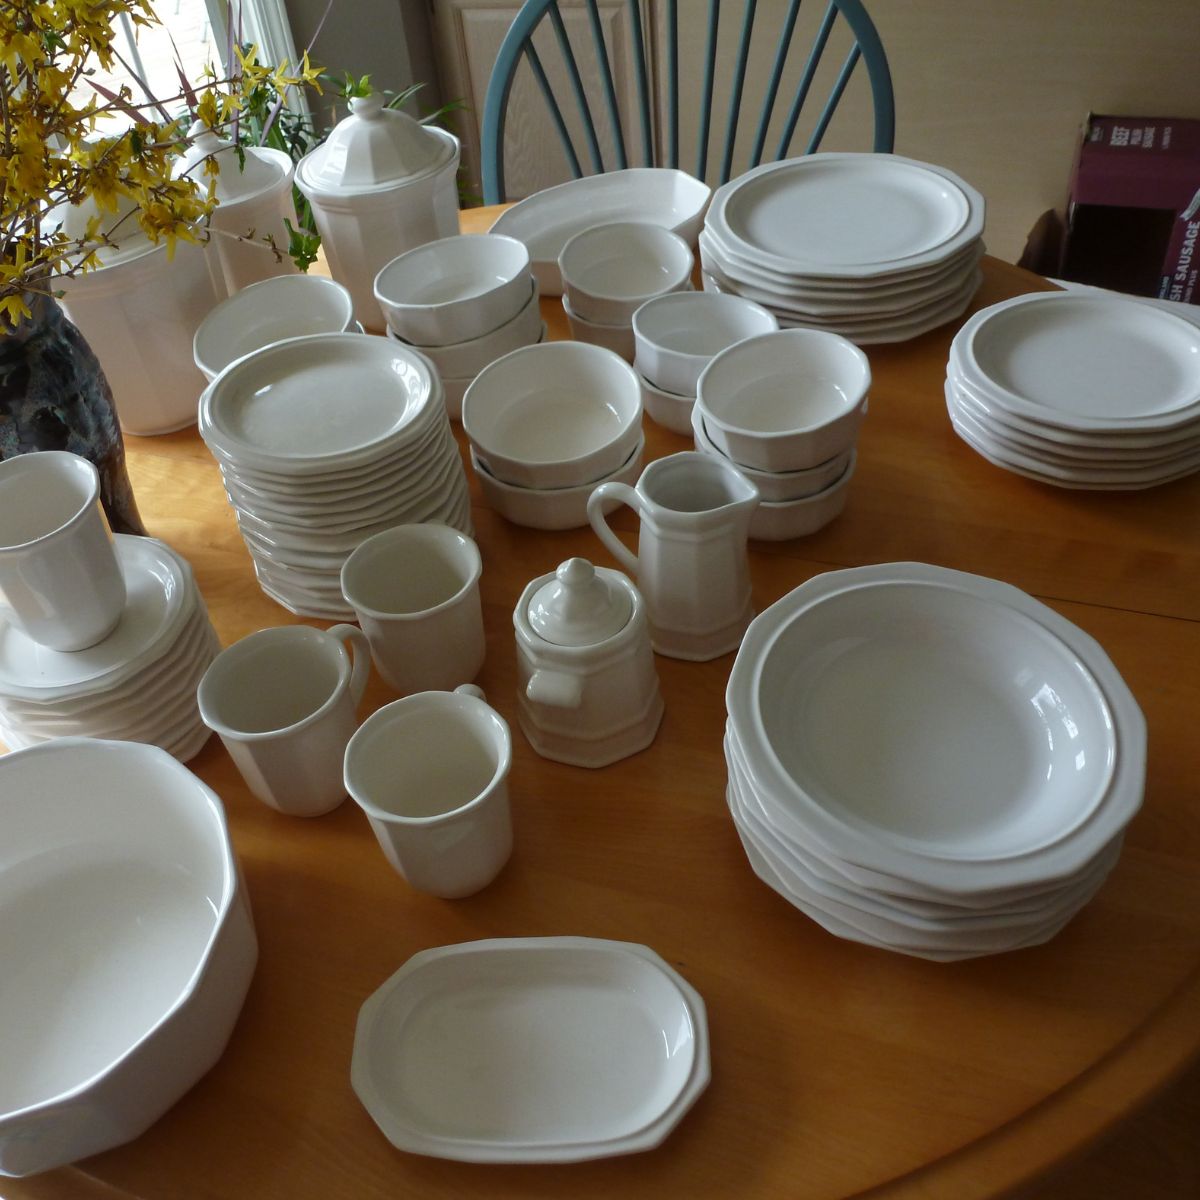 Several Pfaltzgraff heritage pattern dinnerware on a wooden table.